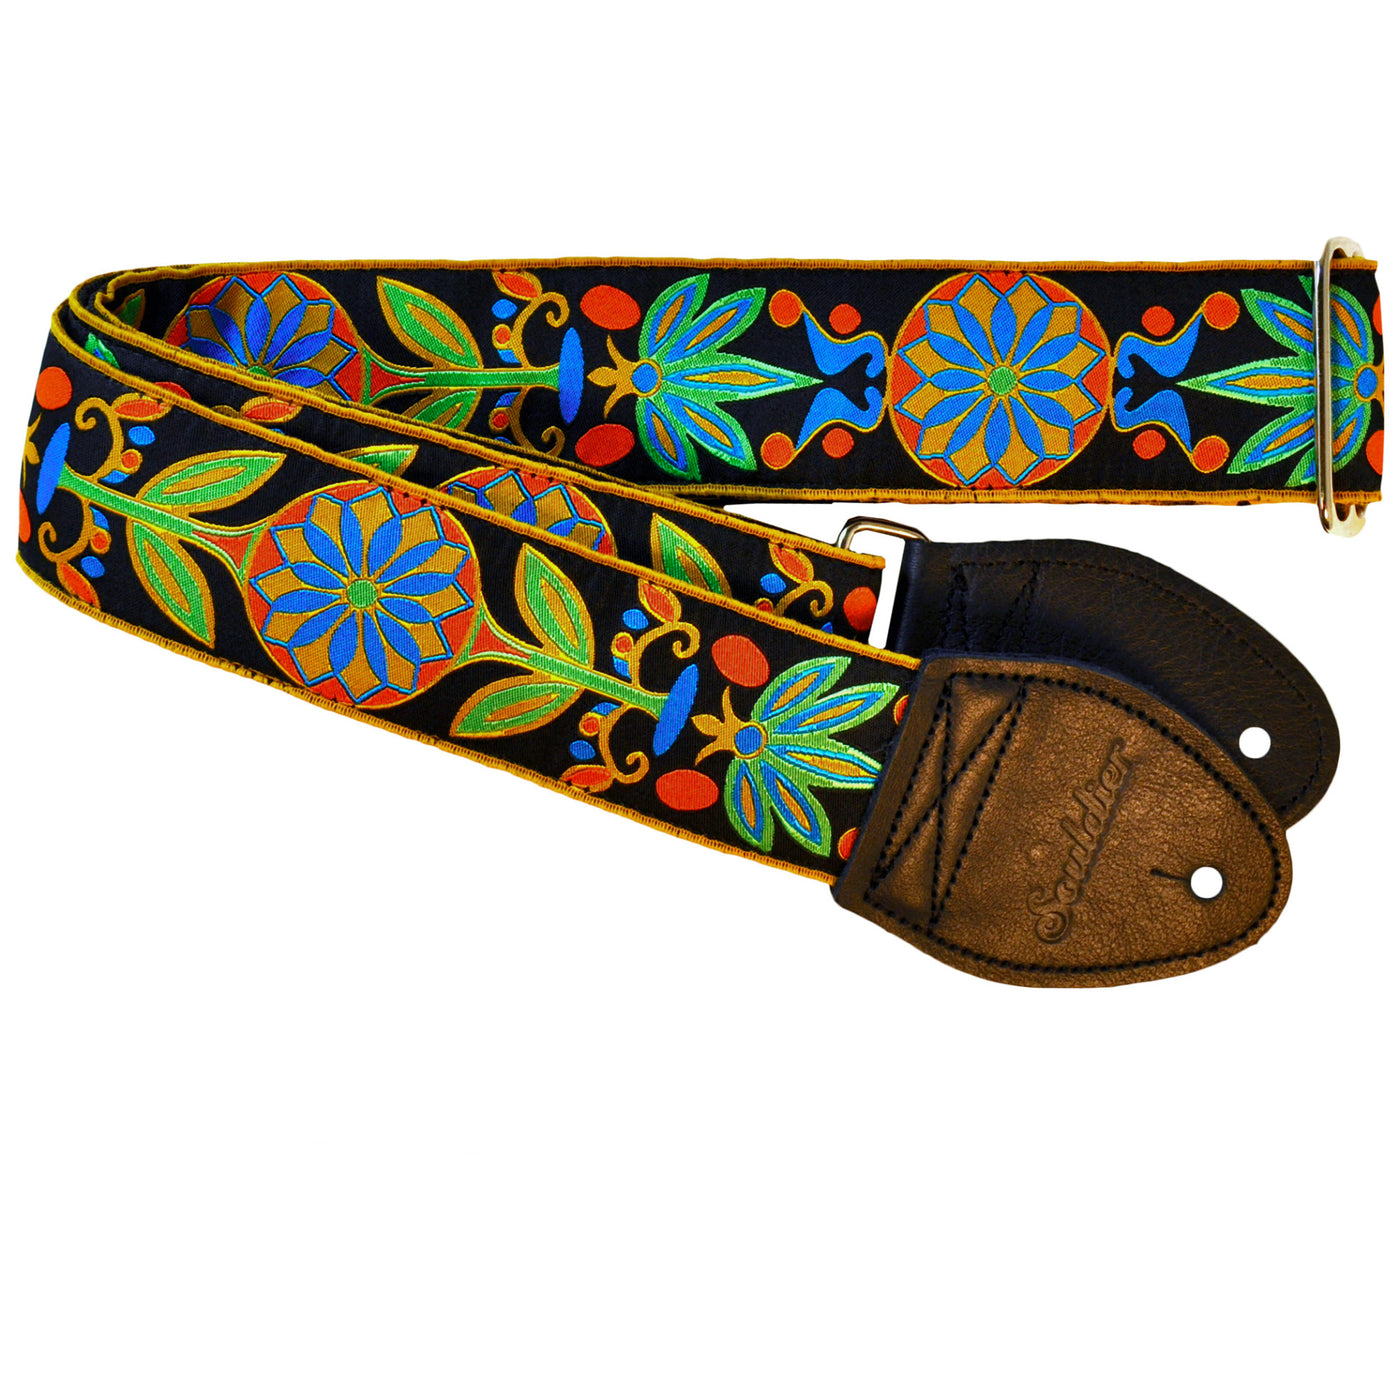 Souldier GS0086BK02BK - Handmade Seatbelt Guitar Strap for Bass, Electric or Acoustic Guitar, 2 Inches Wide and Adjustable Length from 30" to 63"  Made in the USA, Daisy, Blue